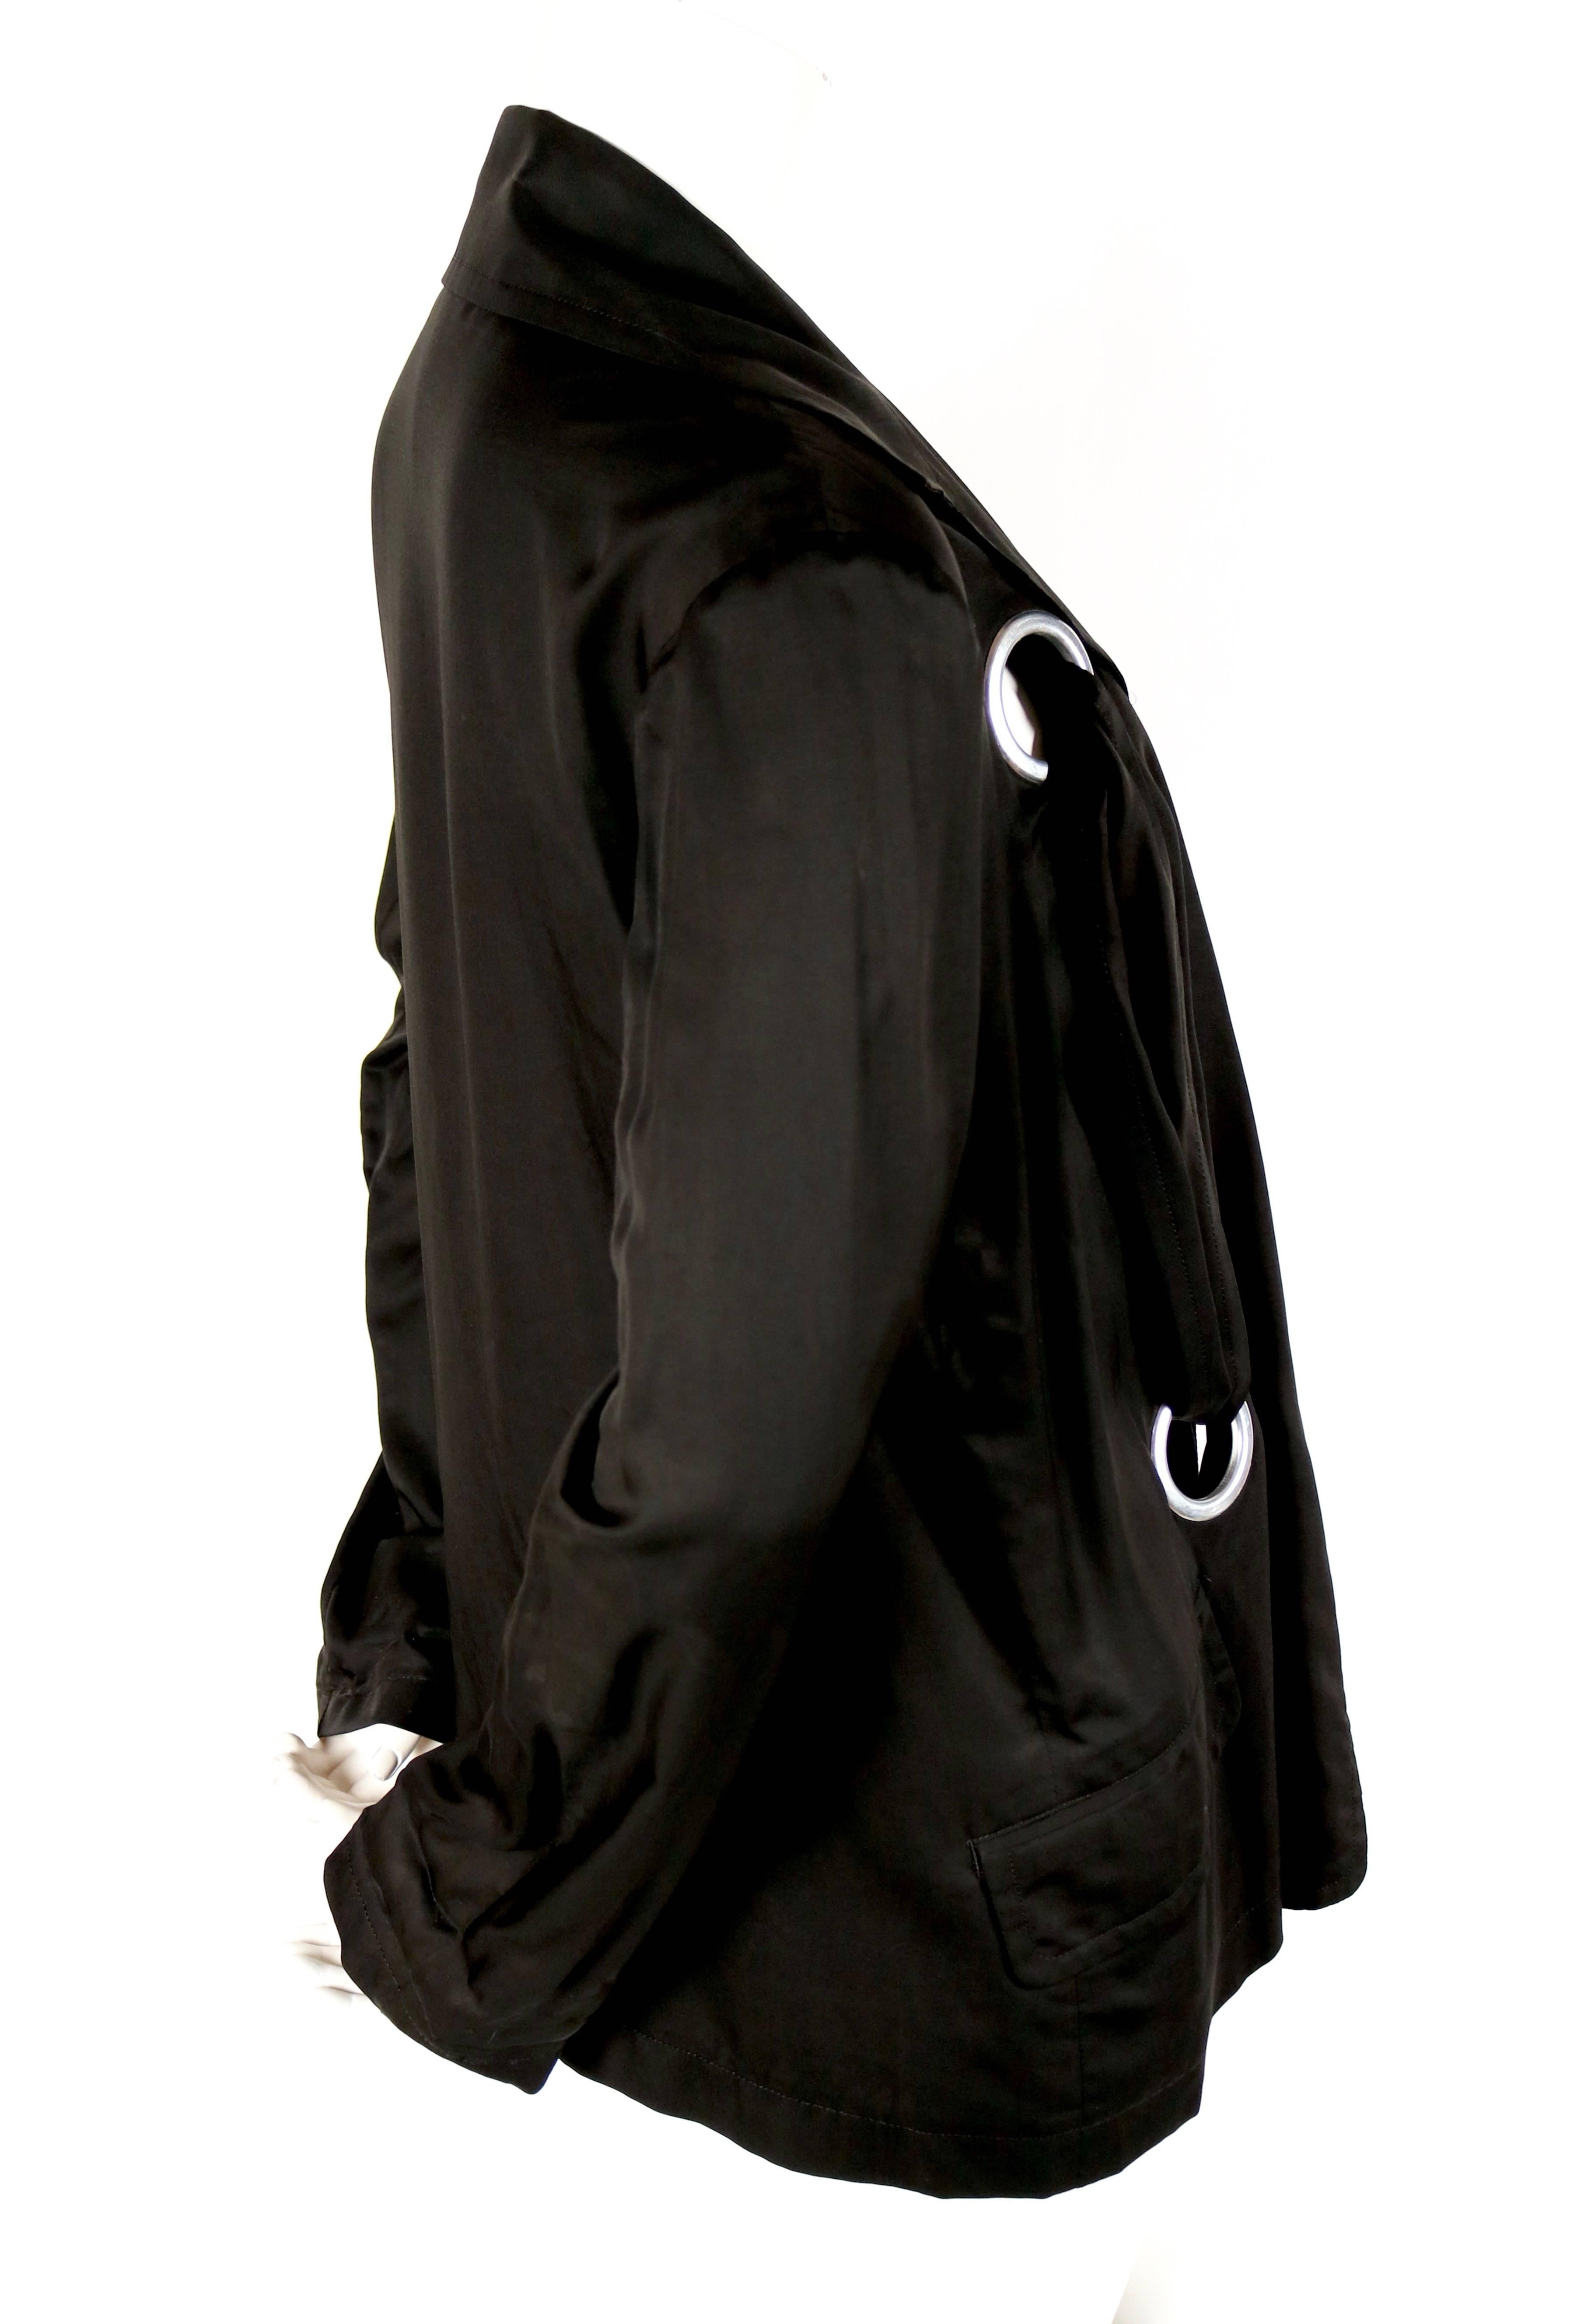 Jet black jacket with large silver grommets from Yohji Yamamoto exactly as seen on the runway for spring of 2004 . Labeled a Japanese size '1' which fits a US small or possibly a medium. Approximate measurements: shoulders 16